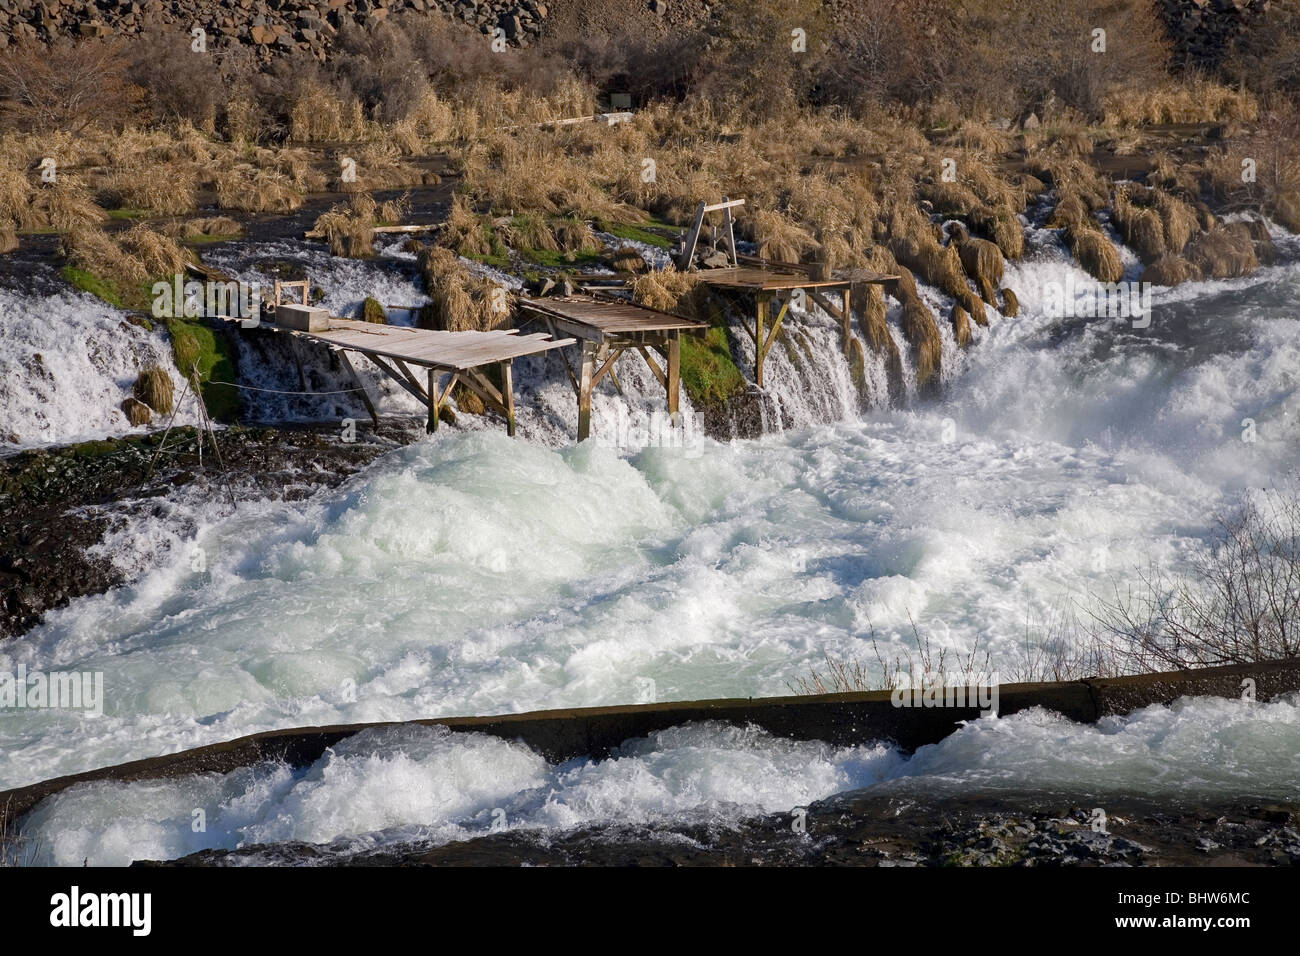 Fishing platforms used by Indians to catch salmon at Sherars Falls, on the Deschutes River, Oregon. Stock Photo